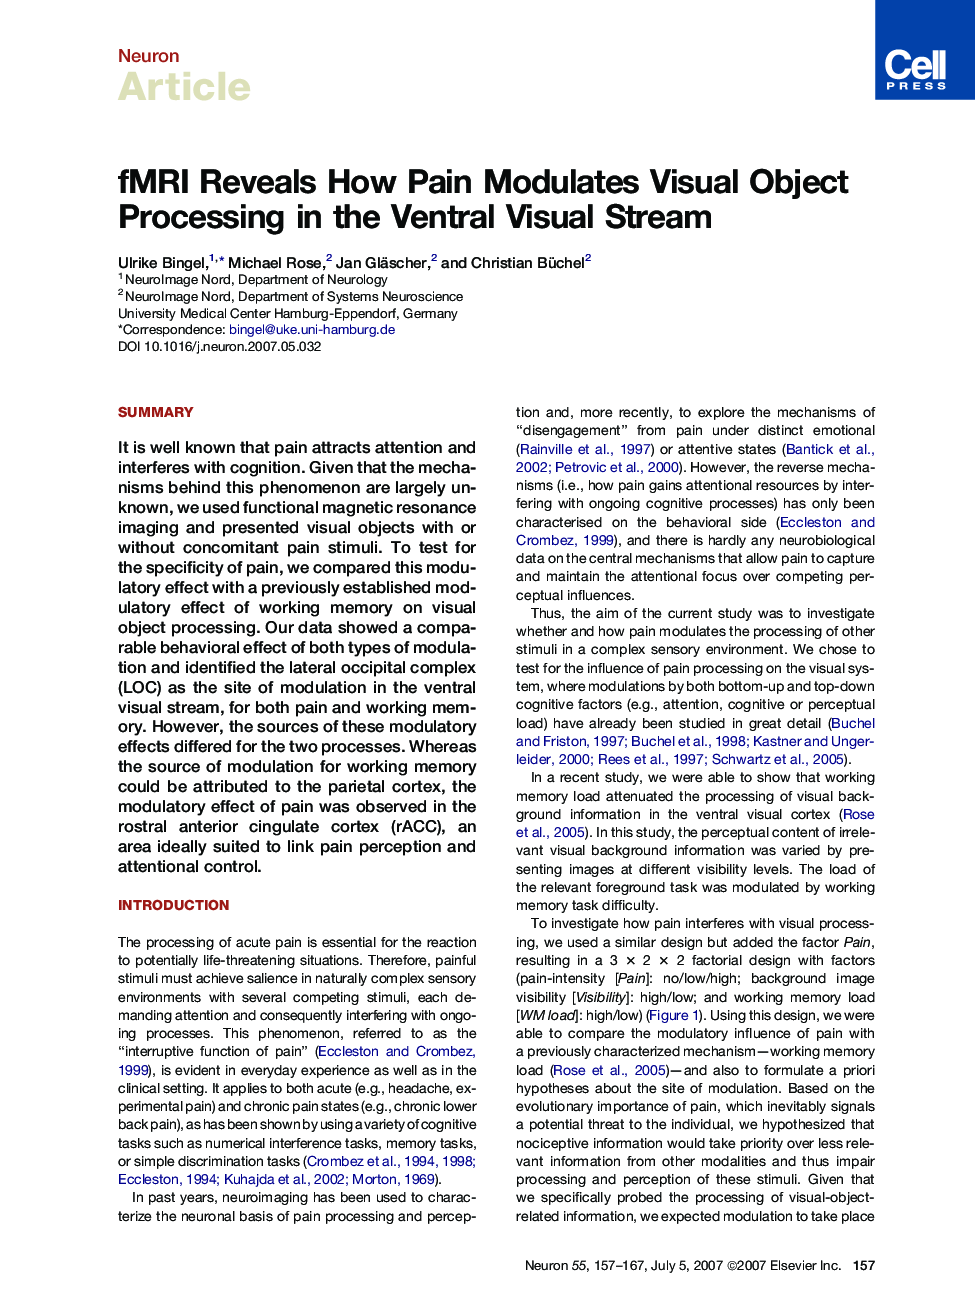 fMRI Reveals How Pain Modulates Visual Object Processing in the Ventral Visual Stream